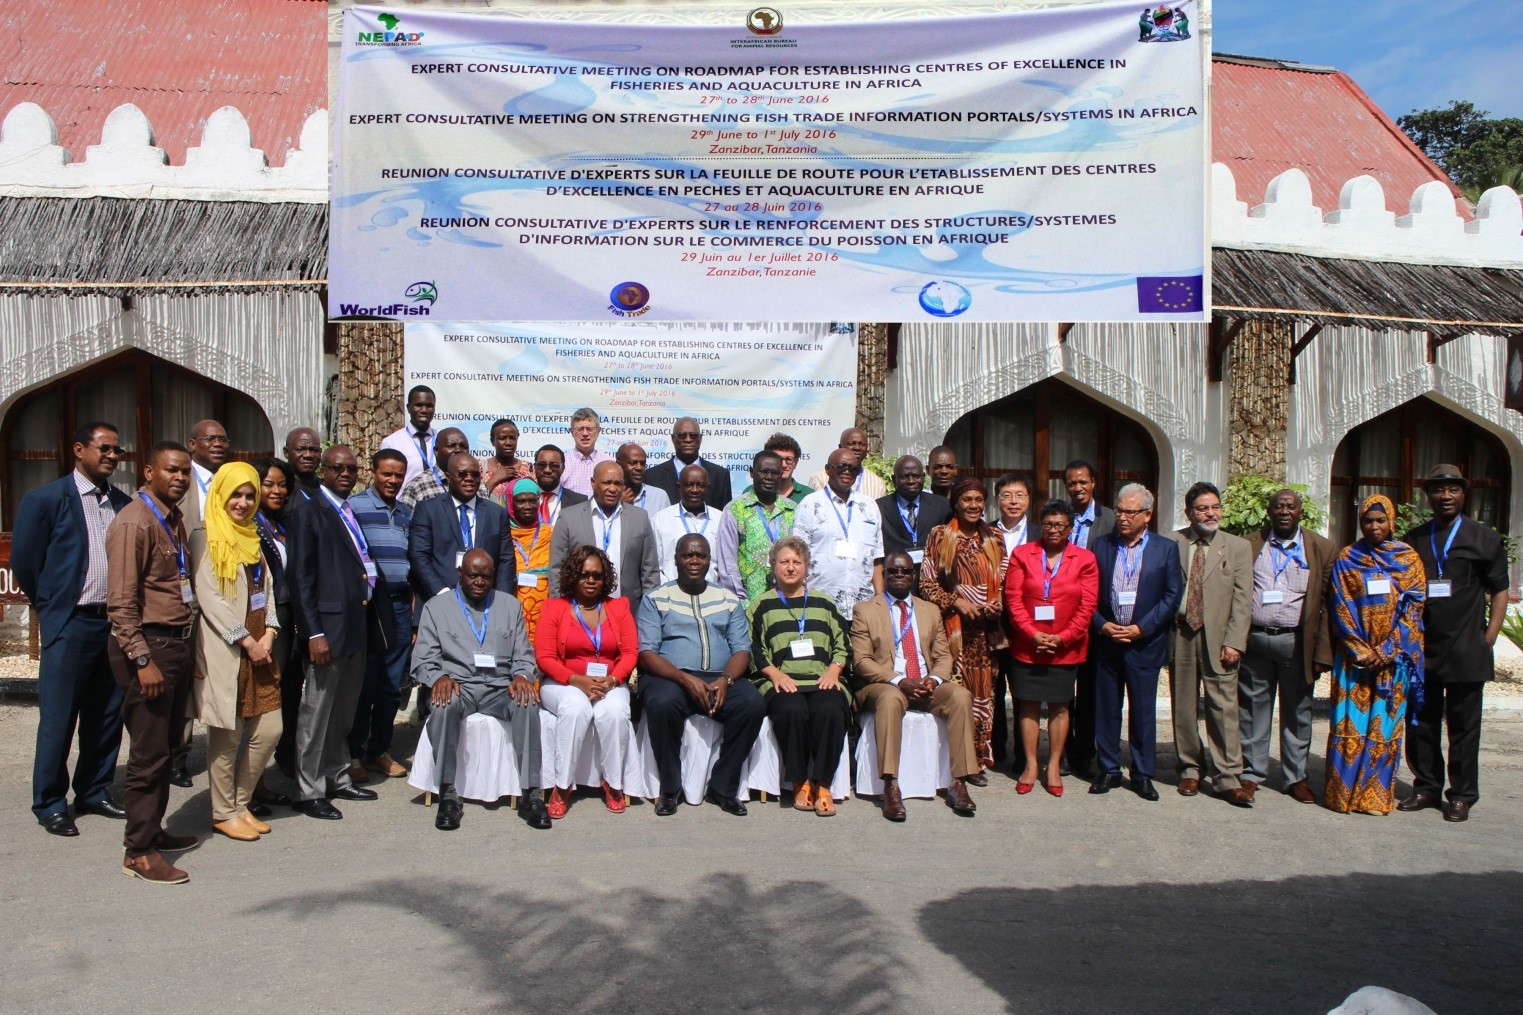 © 2016 AU-IBAR. Experts’ Consultative Meeting on Strengthening Fish Trade Information System in Africa. 29 June - 1st July 2016 Zanzibar, United Republic of Tanzania.